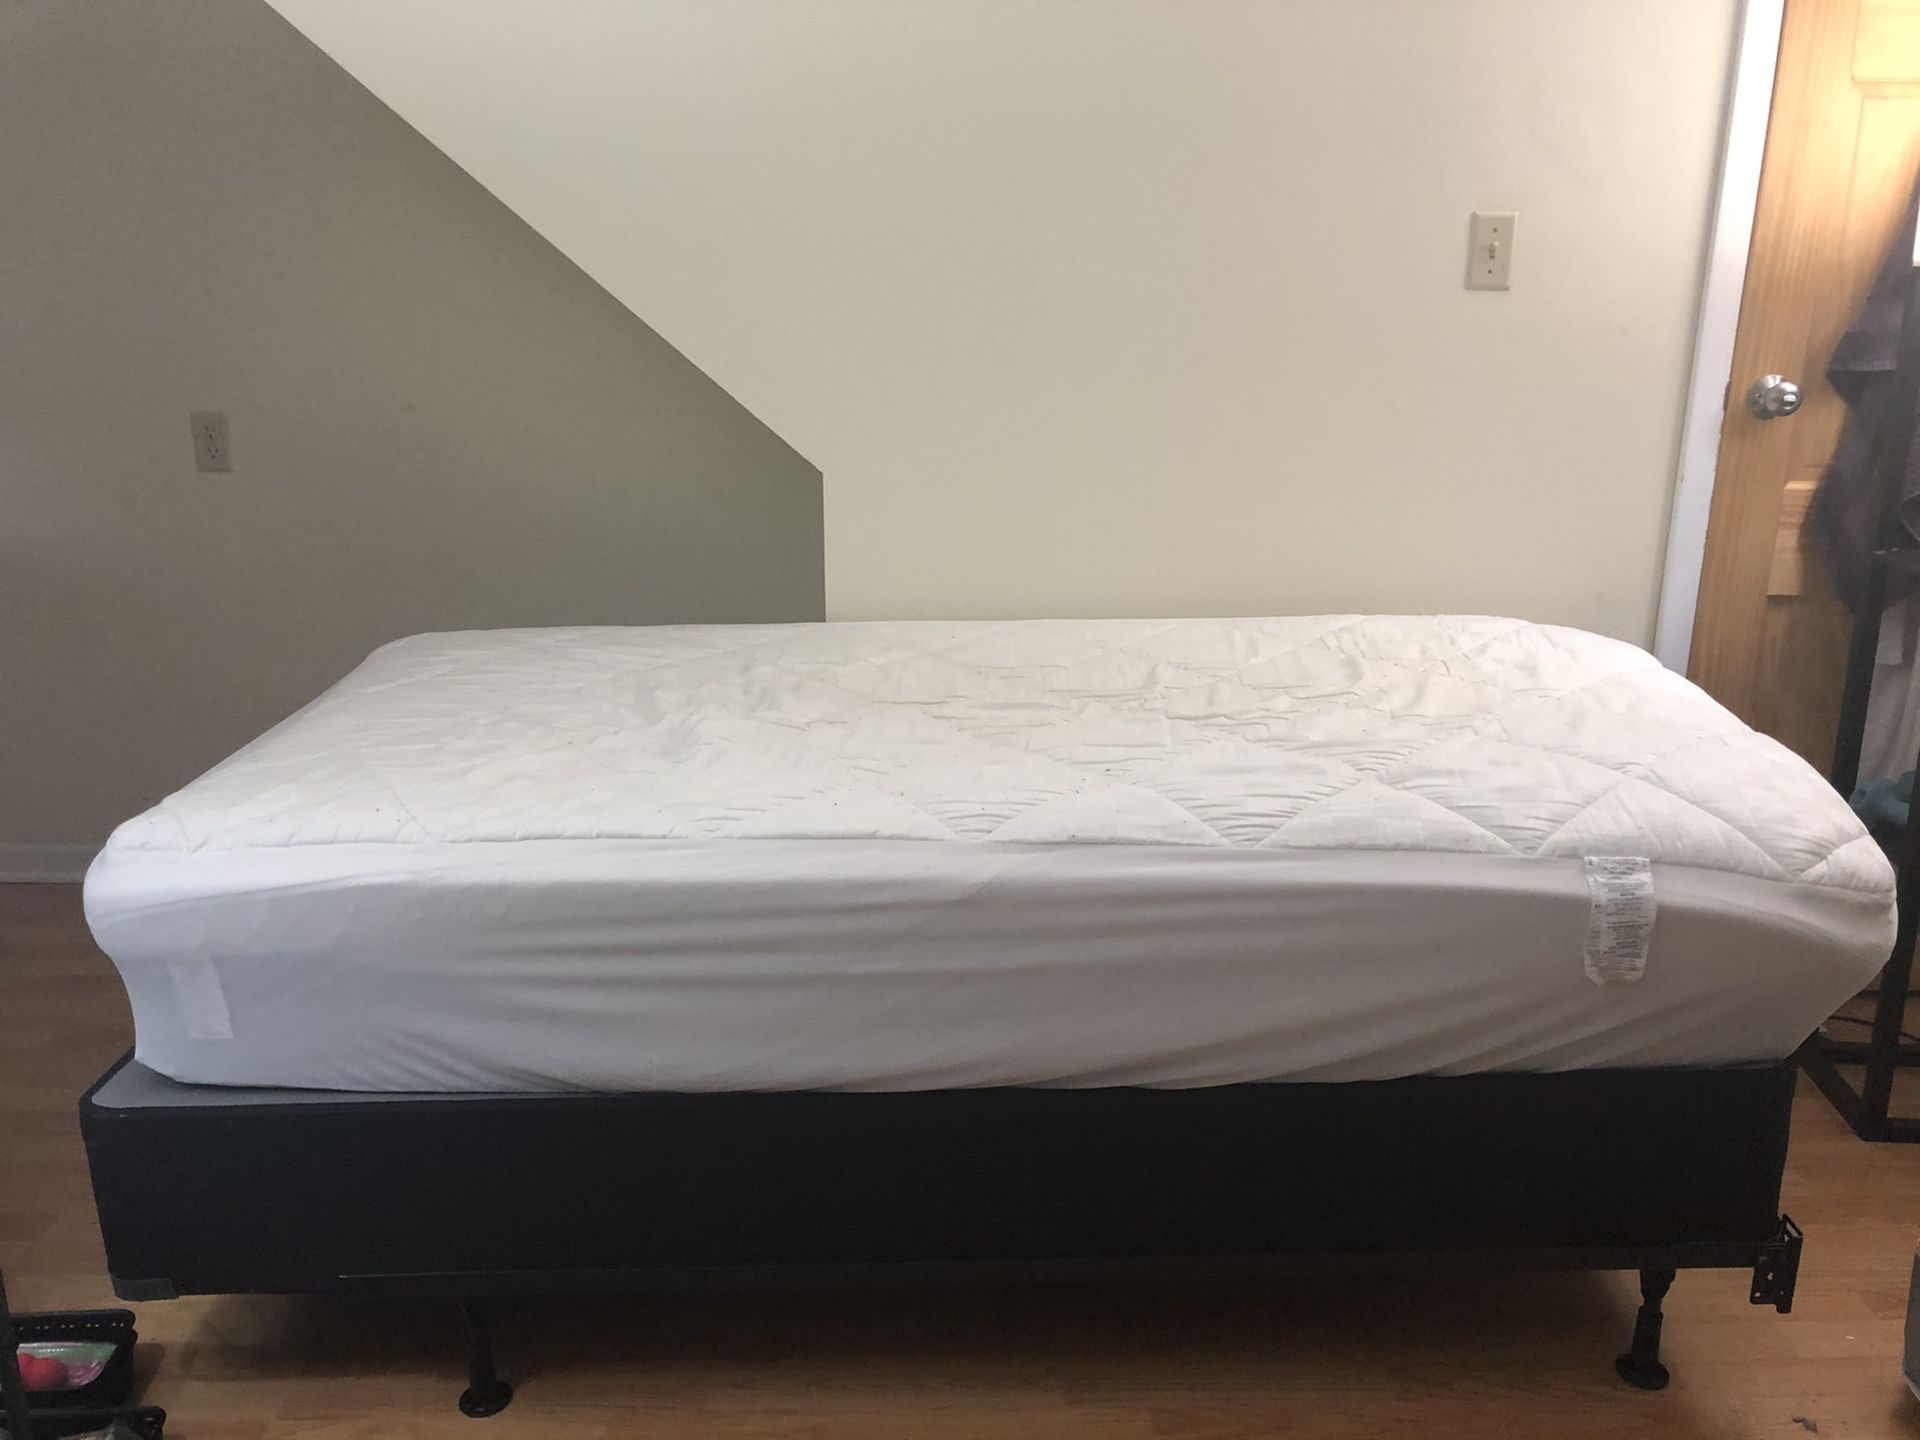 Twin mattress + box spring + bed frame + mattress topper and protector